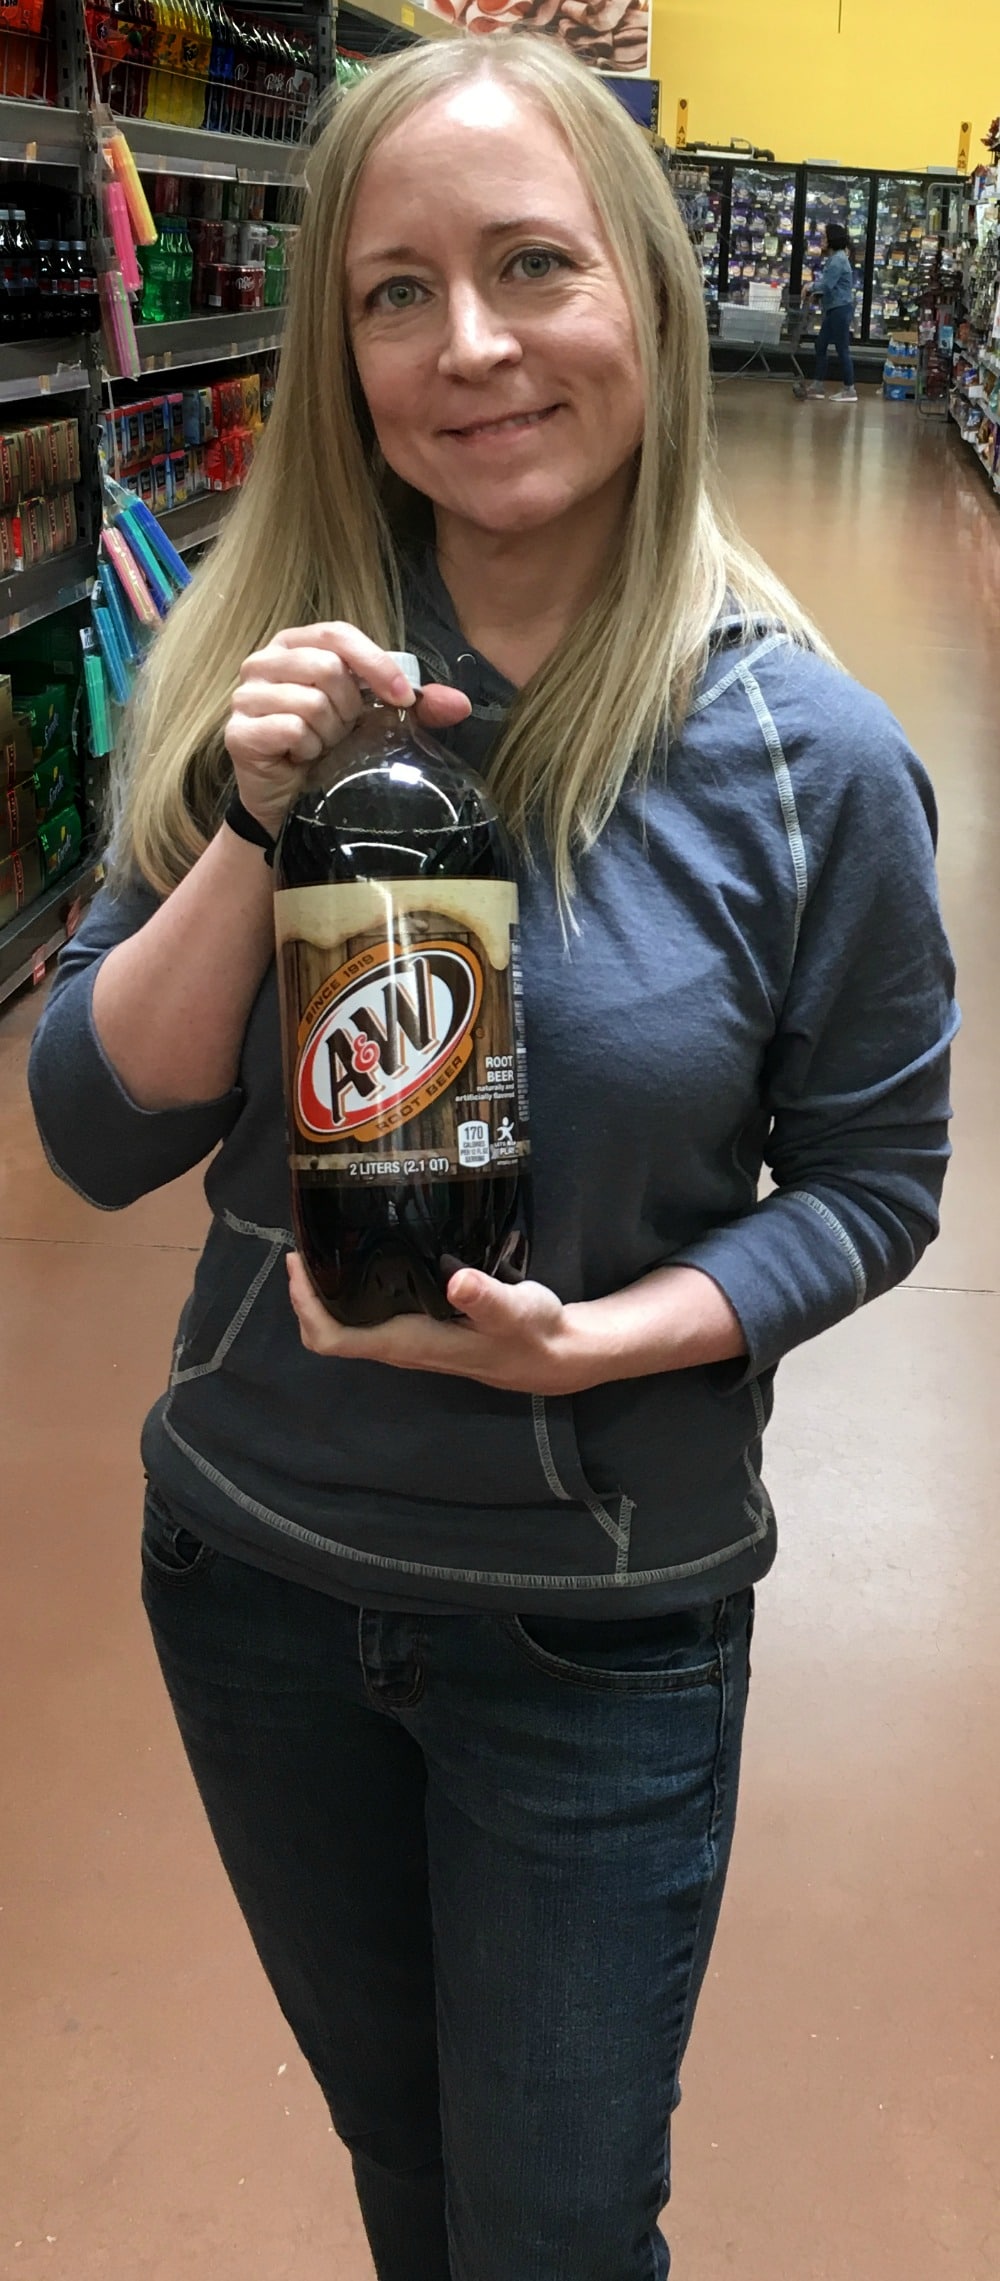 Jen Soltys buying A&W Root Beer from Walmart